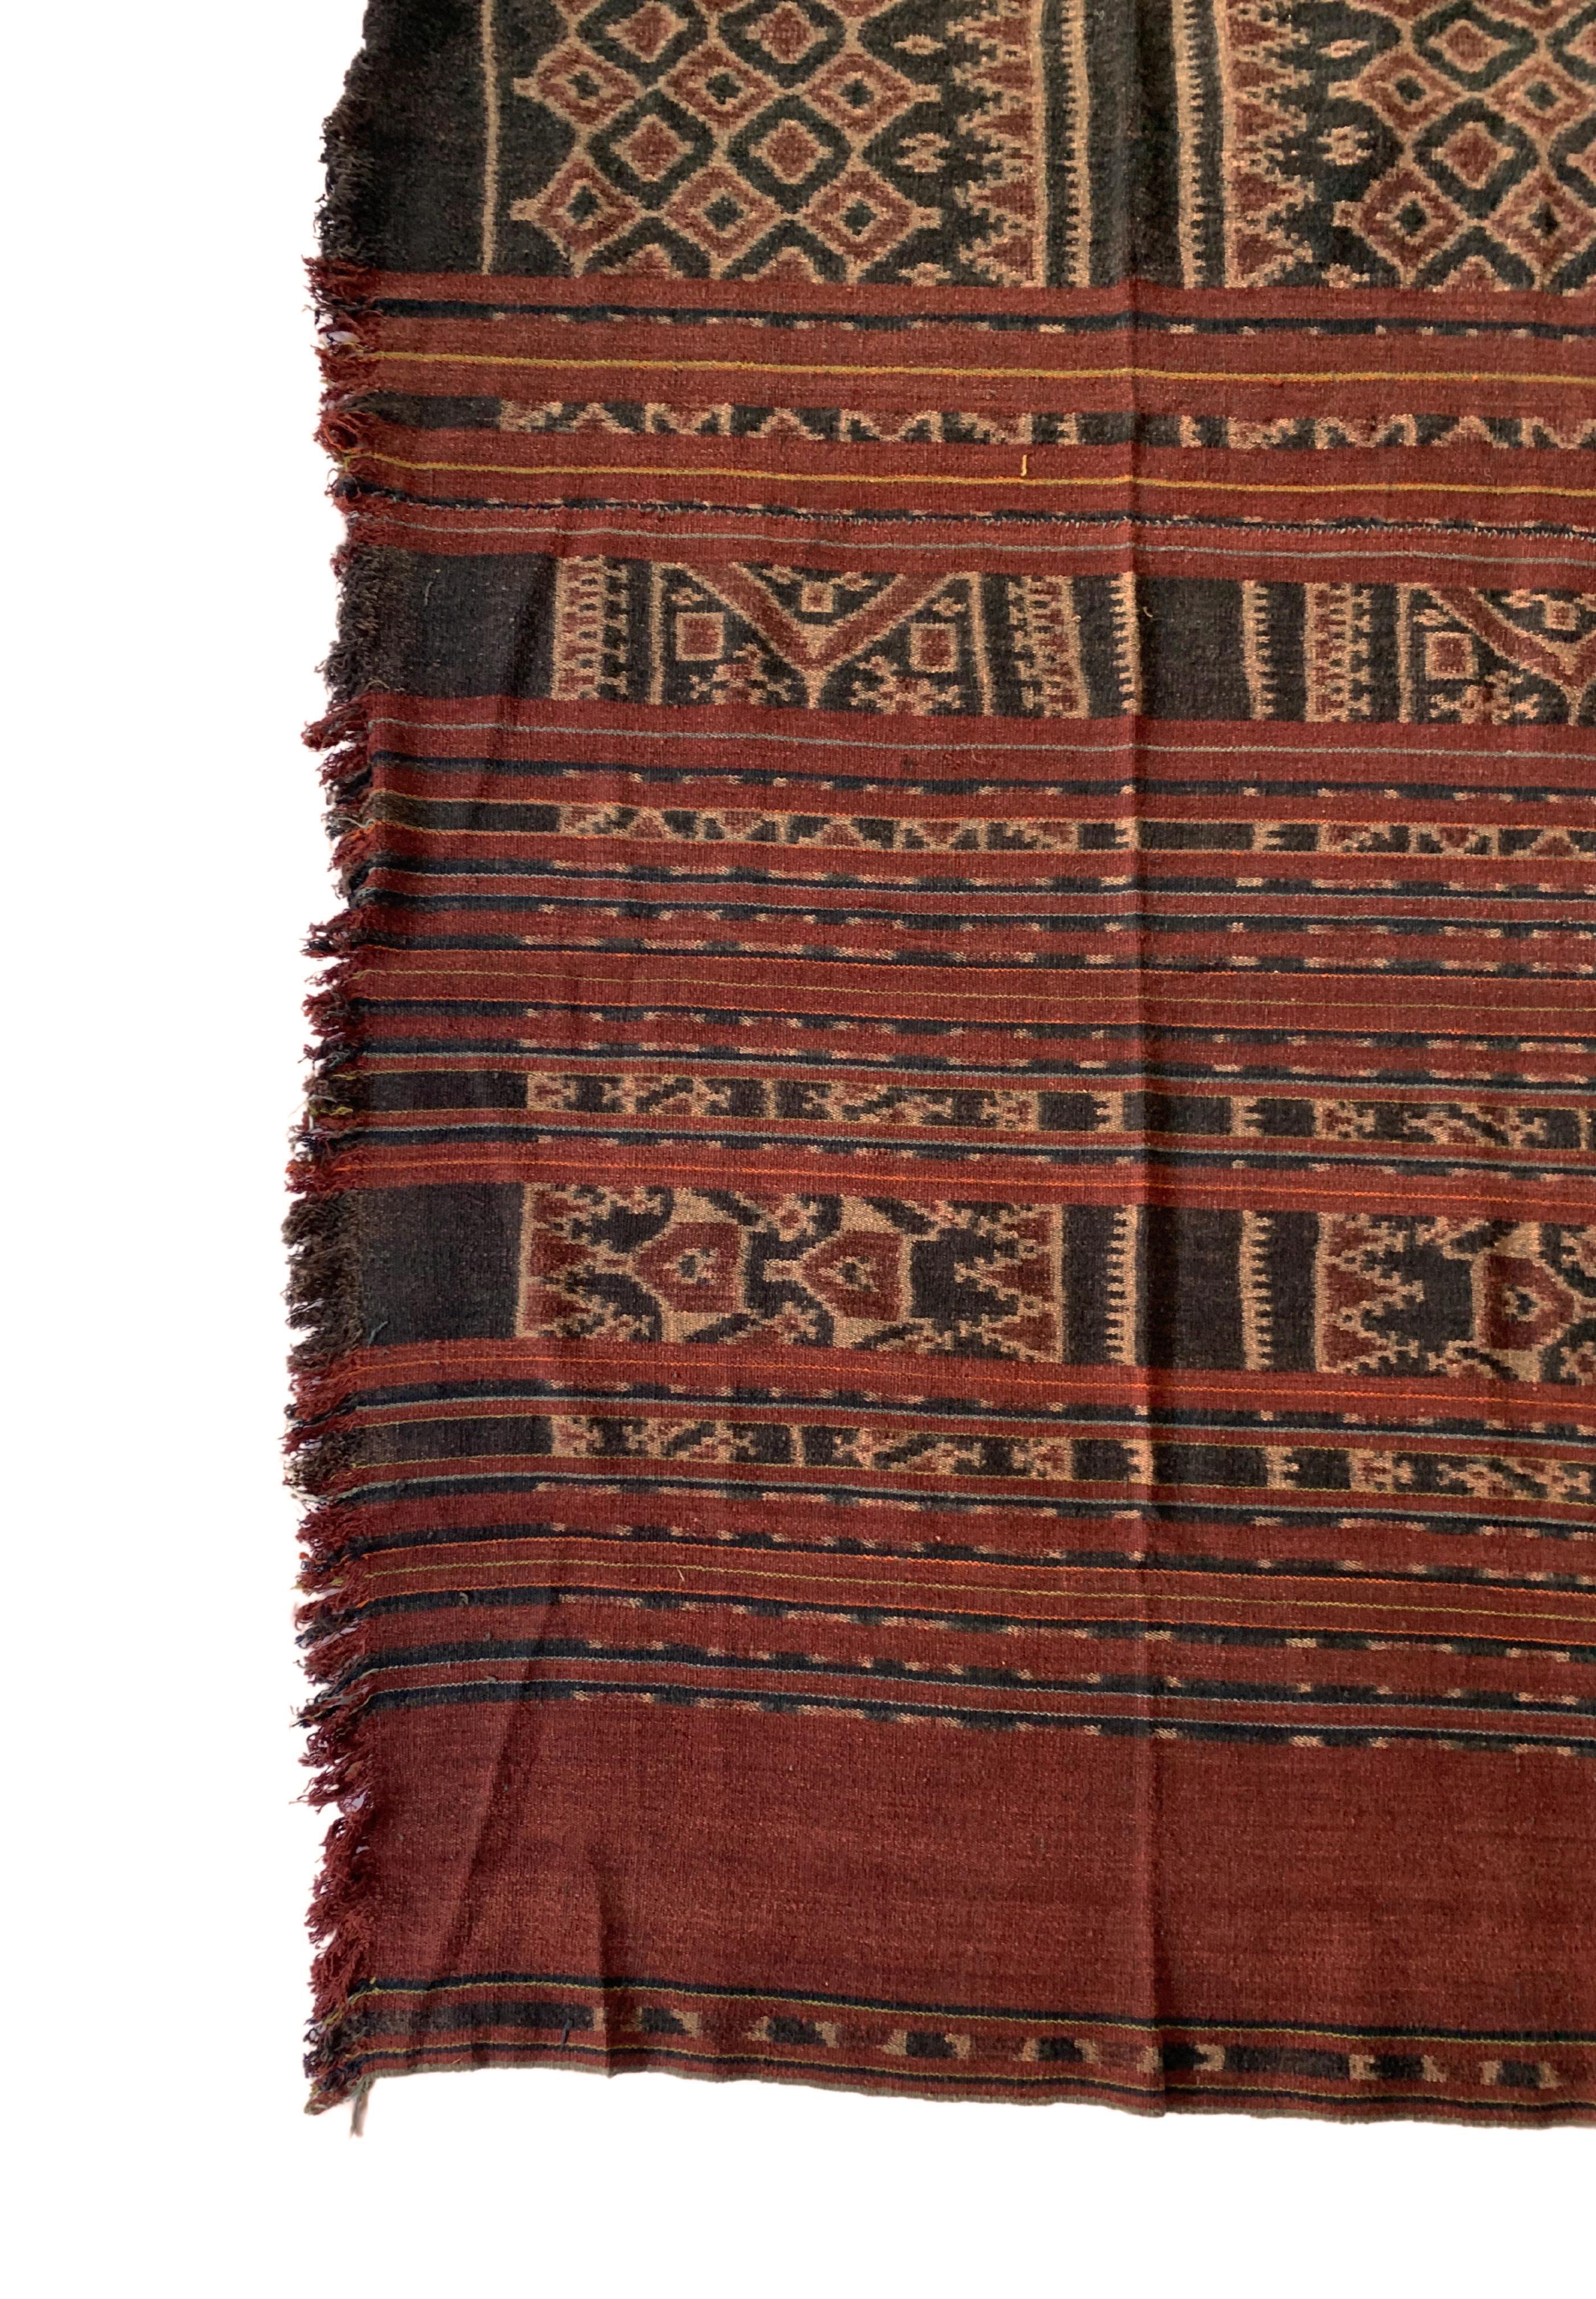 Other Ikat Textile from Toraja Tribe of Sulawesi with Stunning Tribal Motifs, C. 1920 For Sale